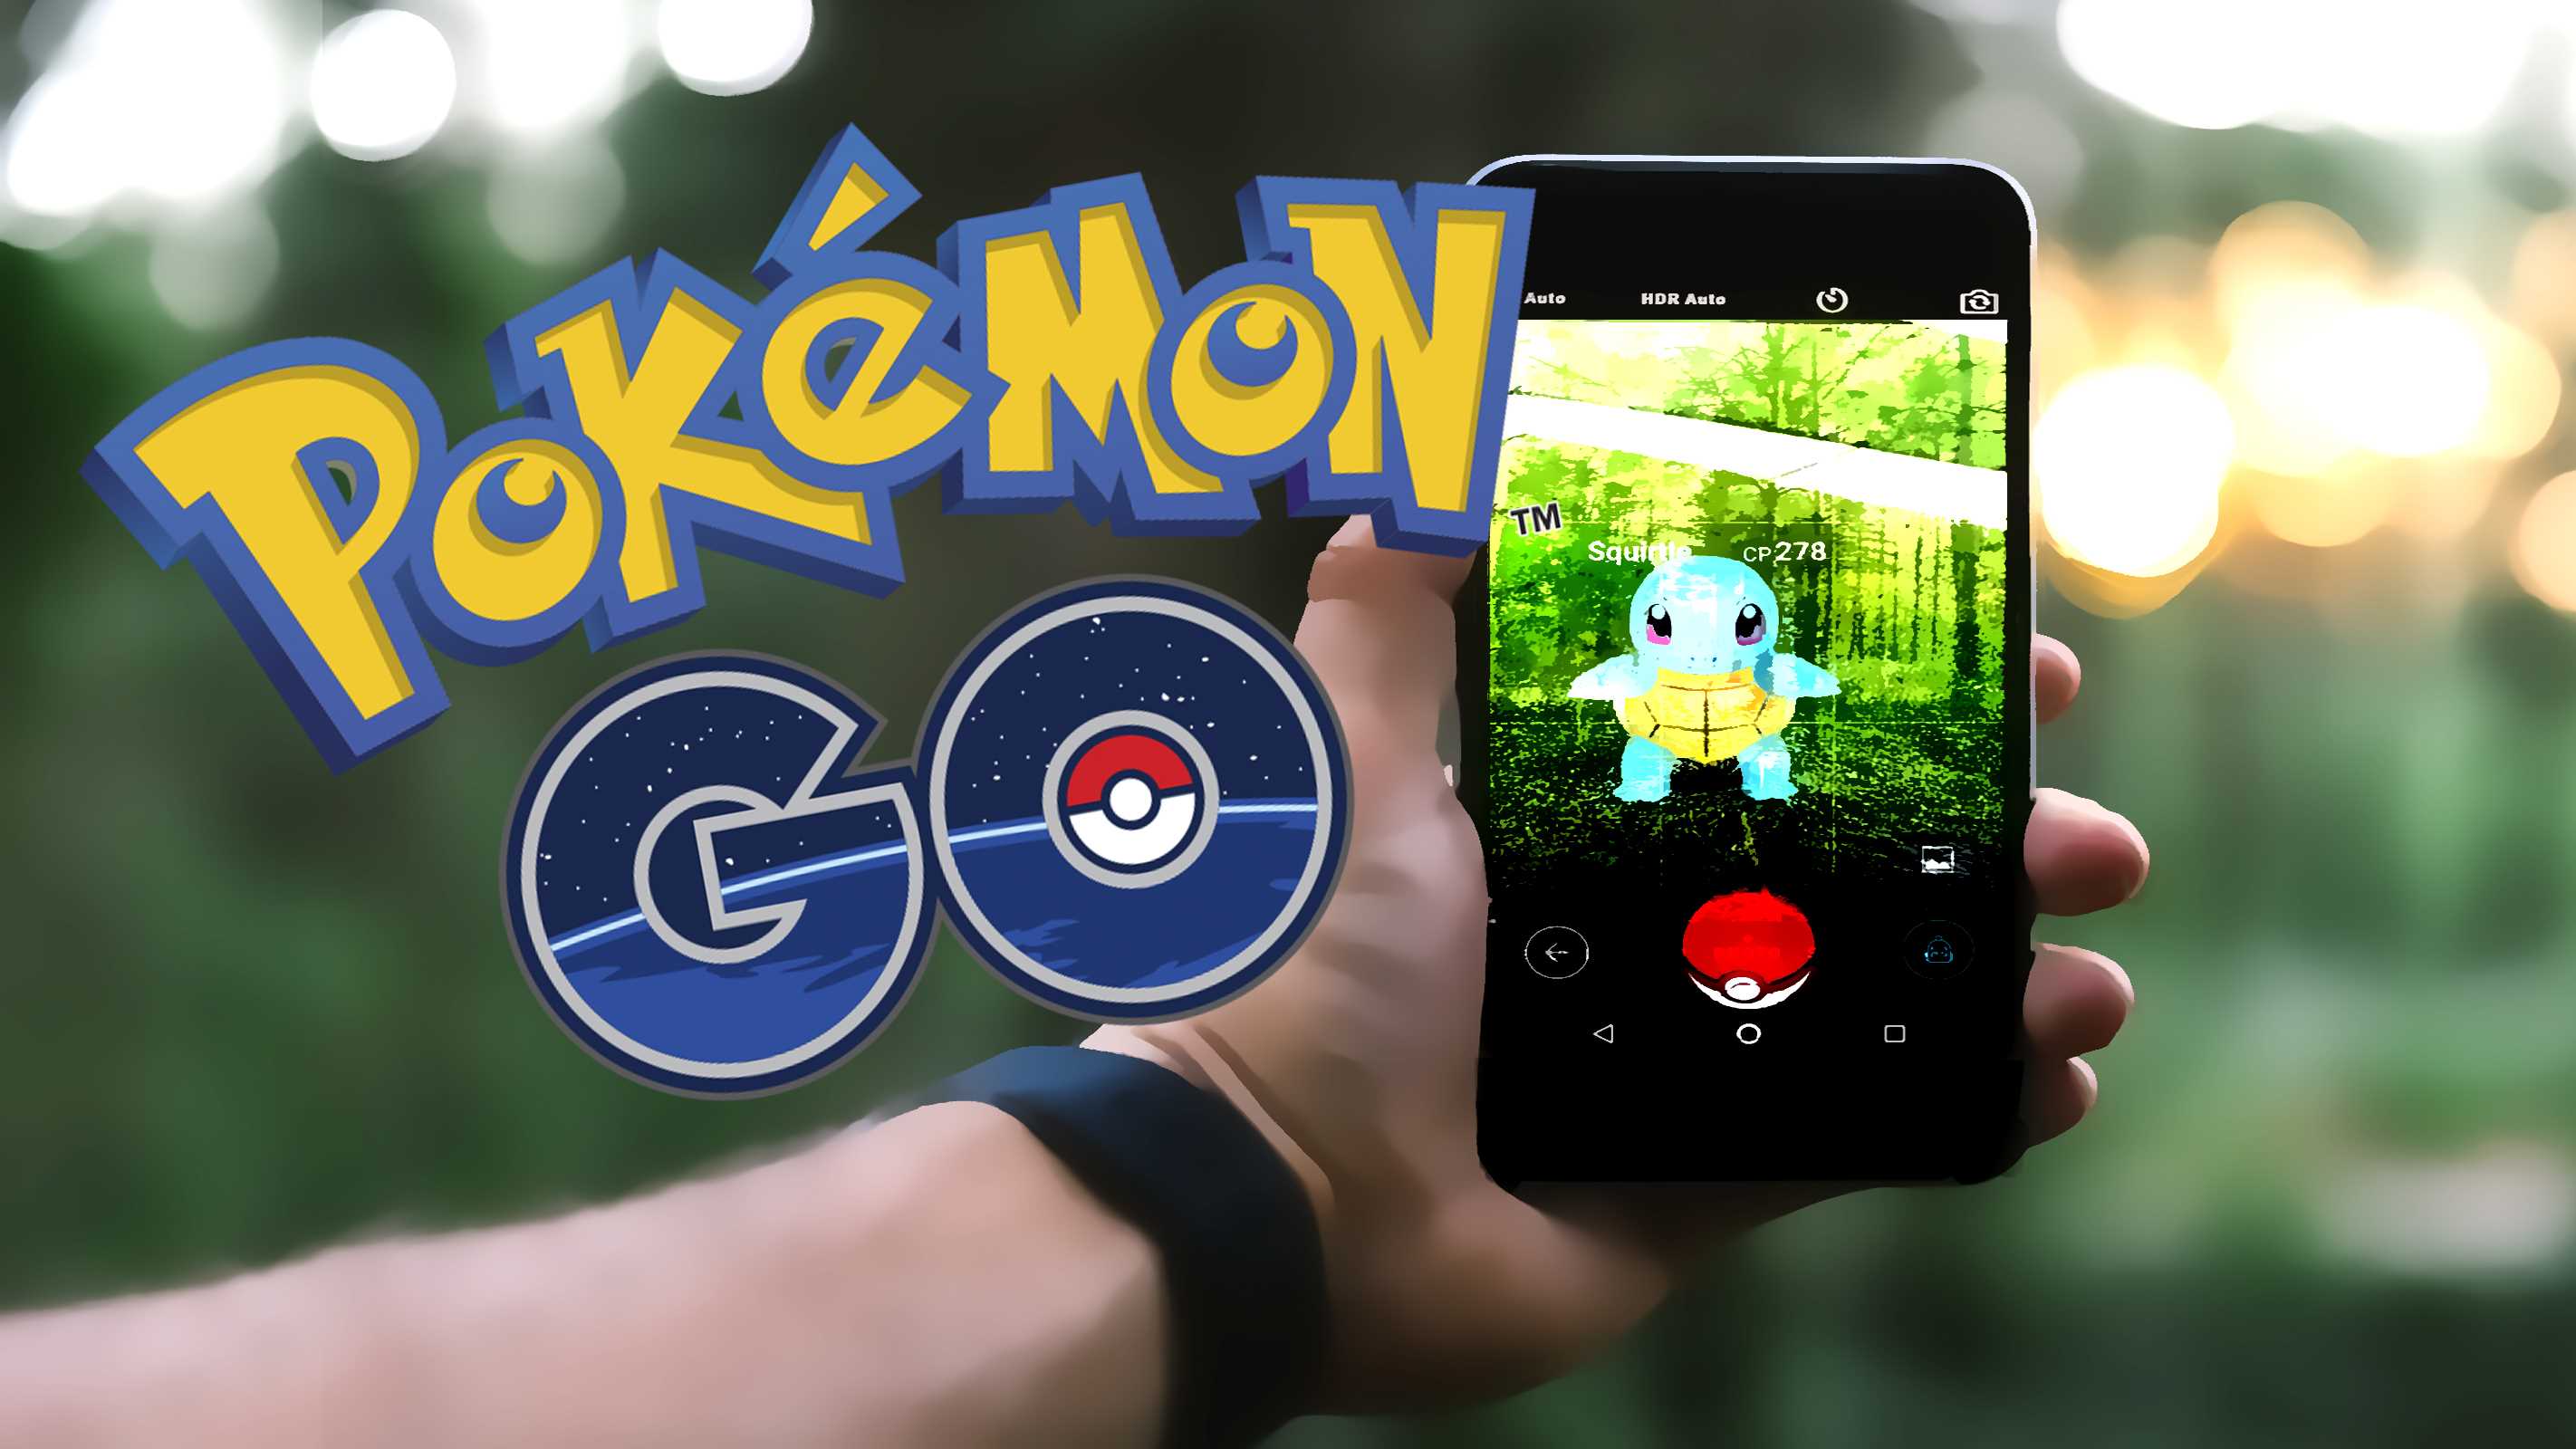 Pokémon Go pros and cons: is it a good game? - netivist